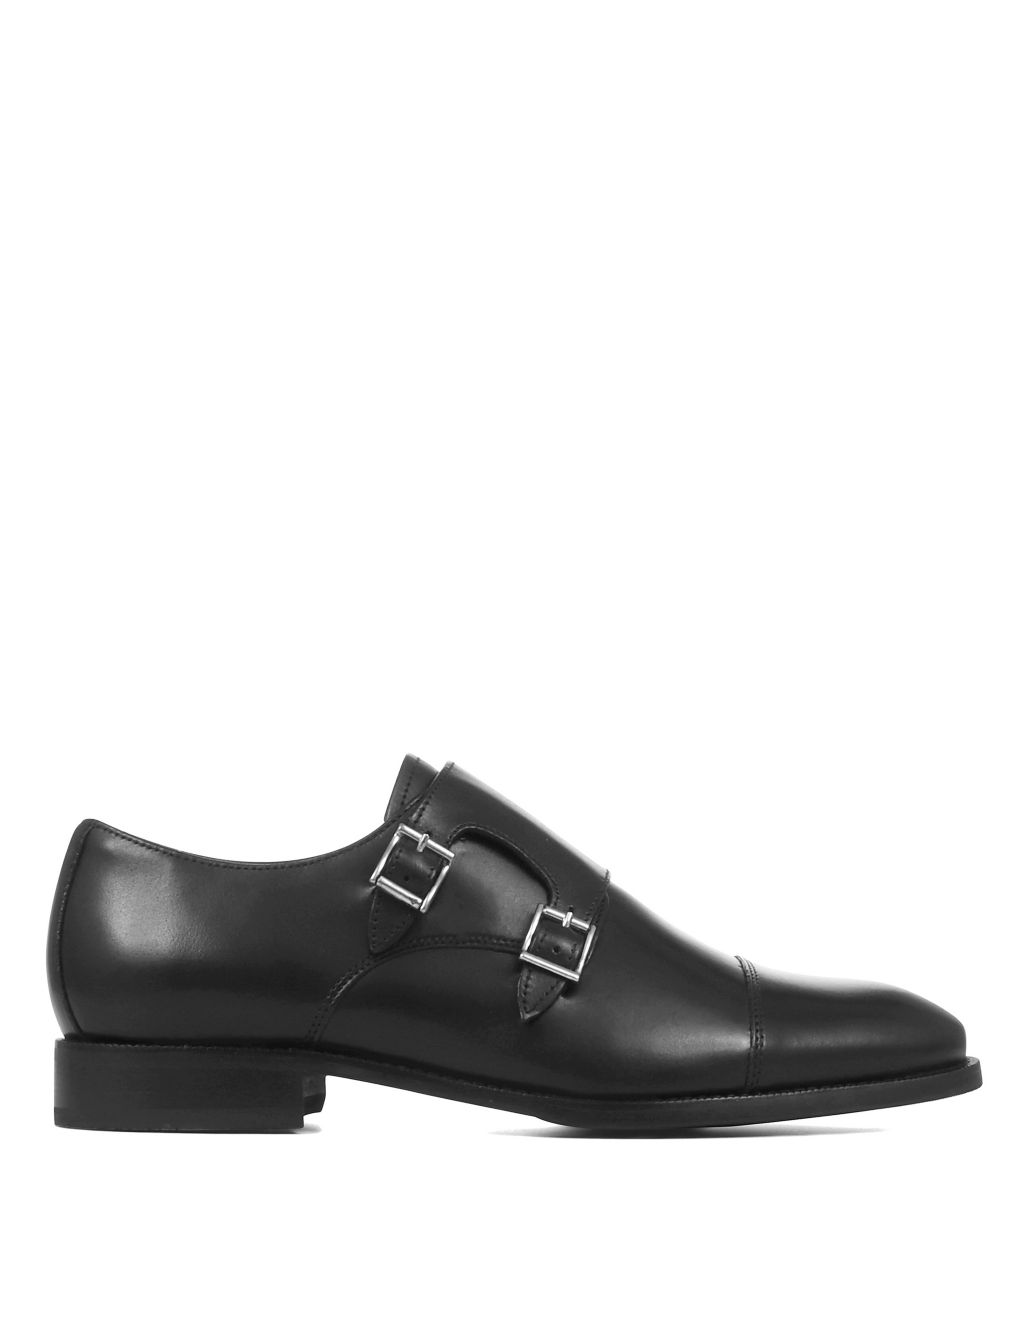 Leather Double Monk Strap Shoes image 5